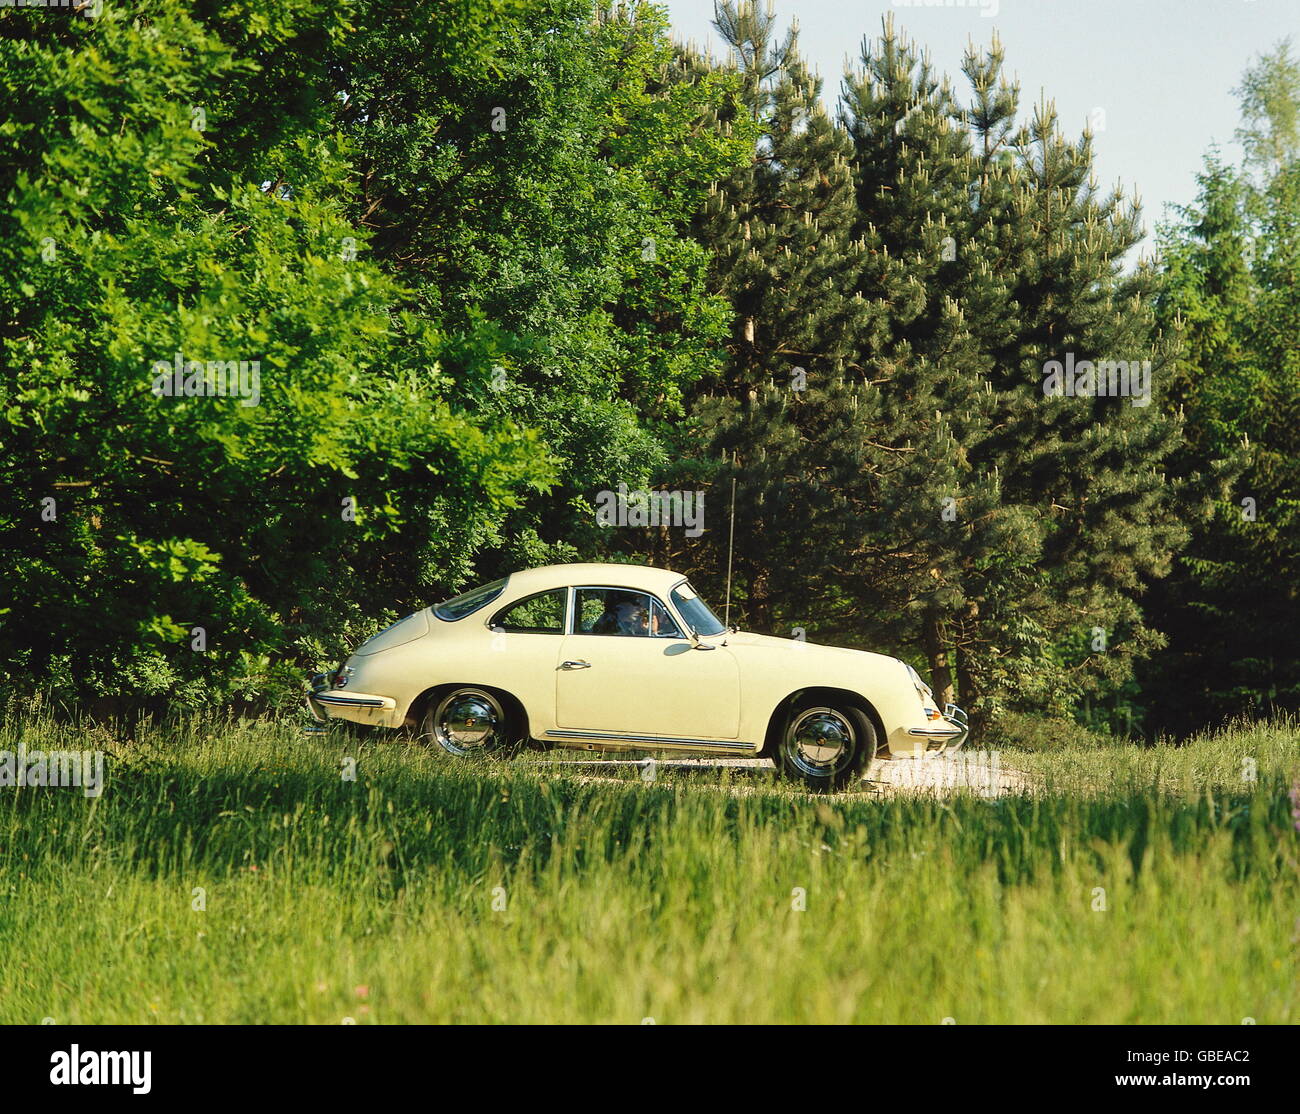 transport / transportation, car, vehicle variants, Porsche 356 SC, white, 1950s, 50s, 20th century, historic, historical, veteran car, classic car, vintage car, veteran cars, classic cars, vintage cars, automobile, automobiles, Additional-Rights-Clearences-Not Available Stock Photo